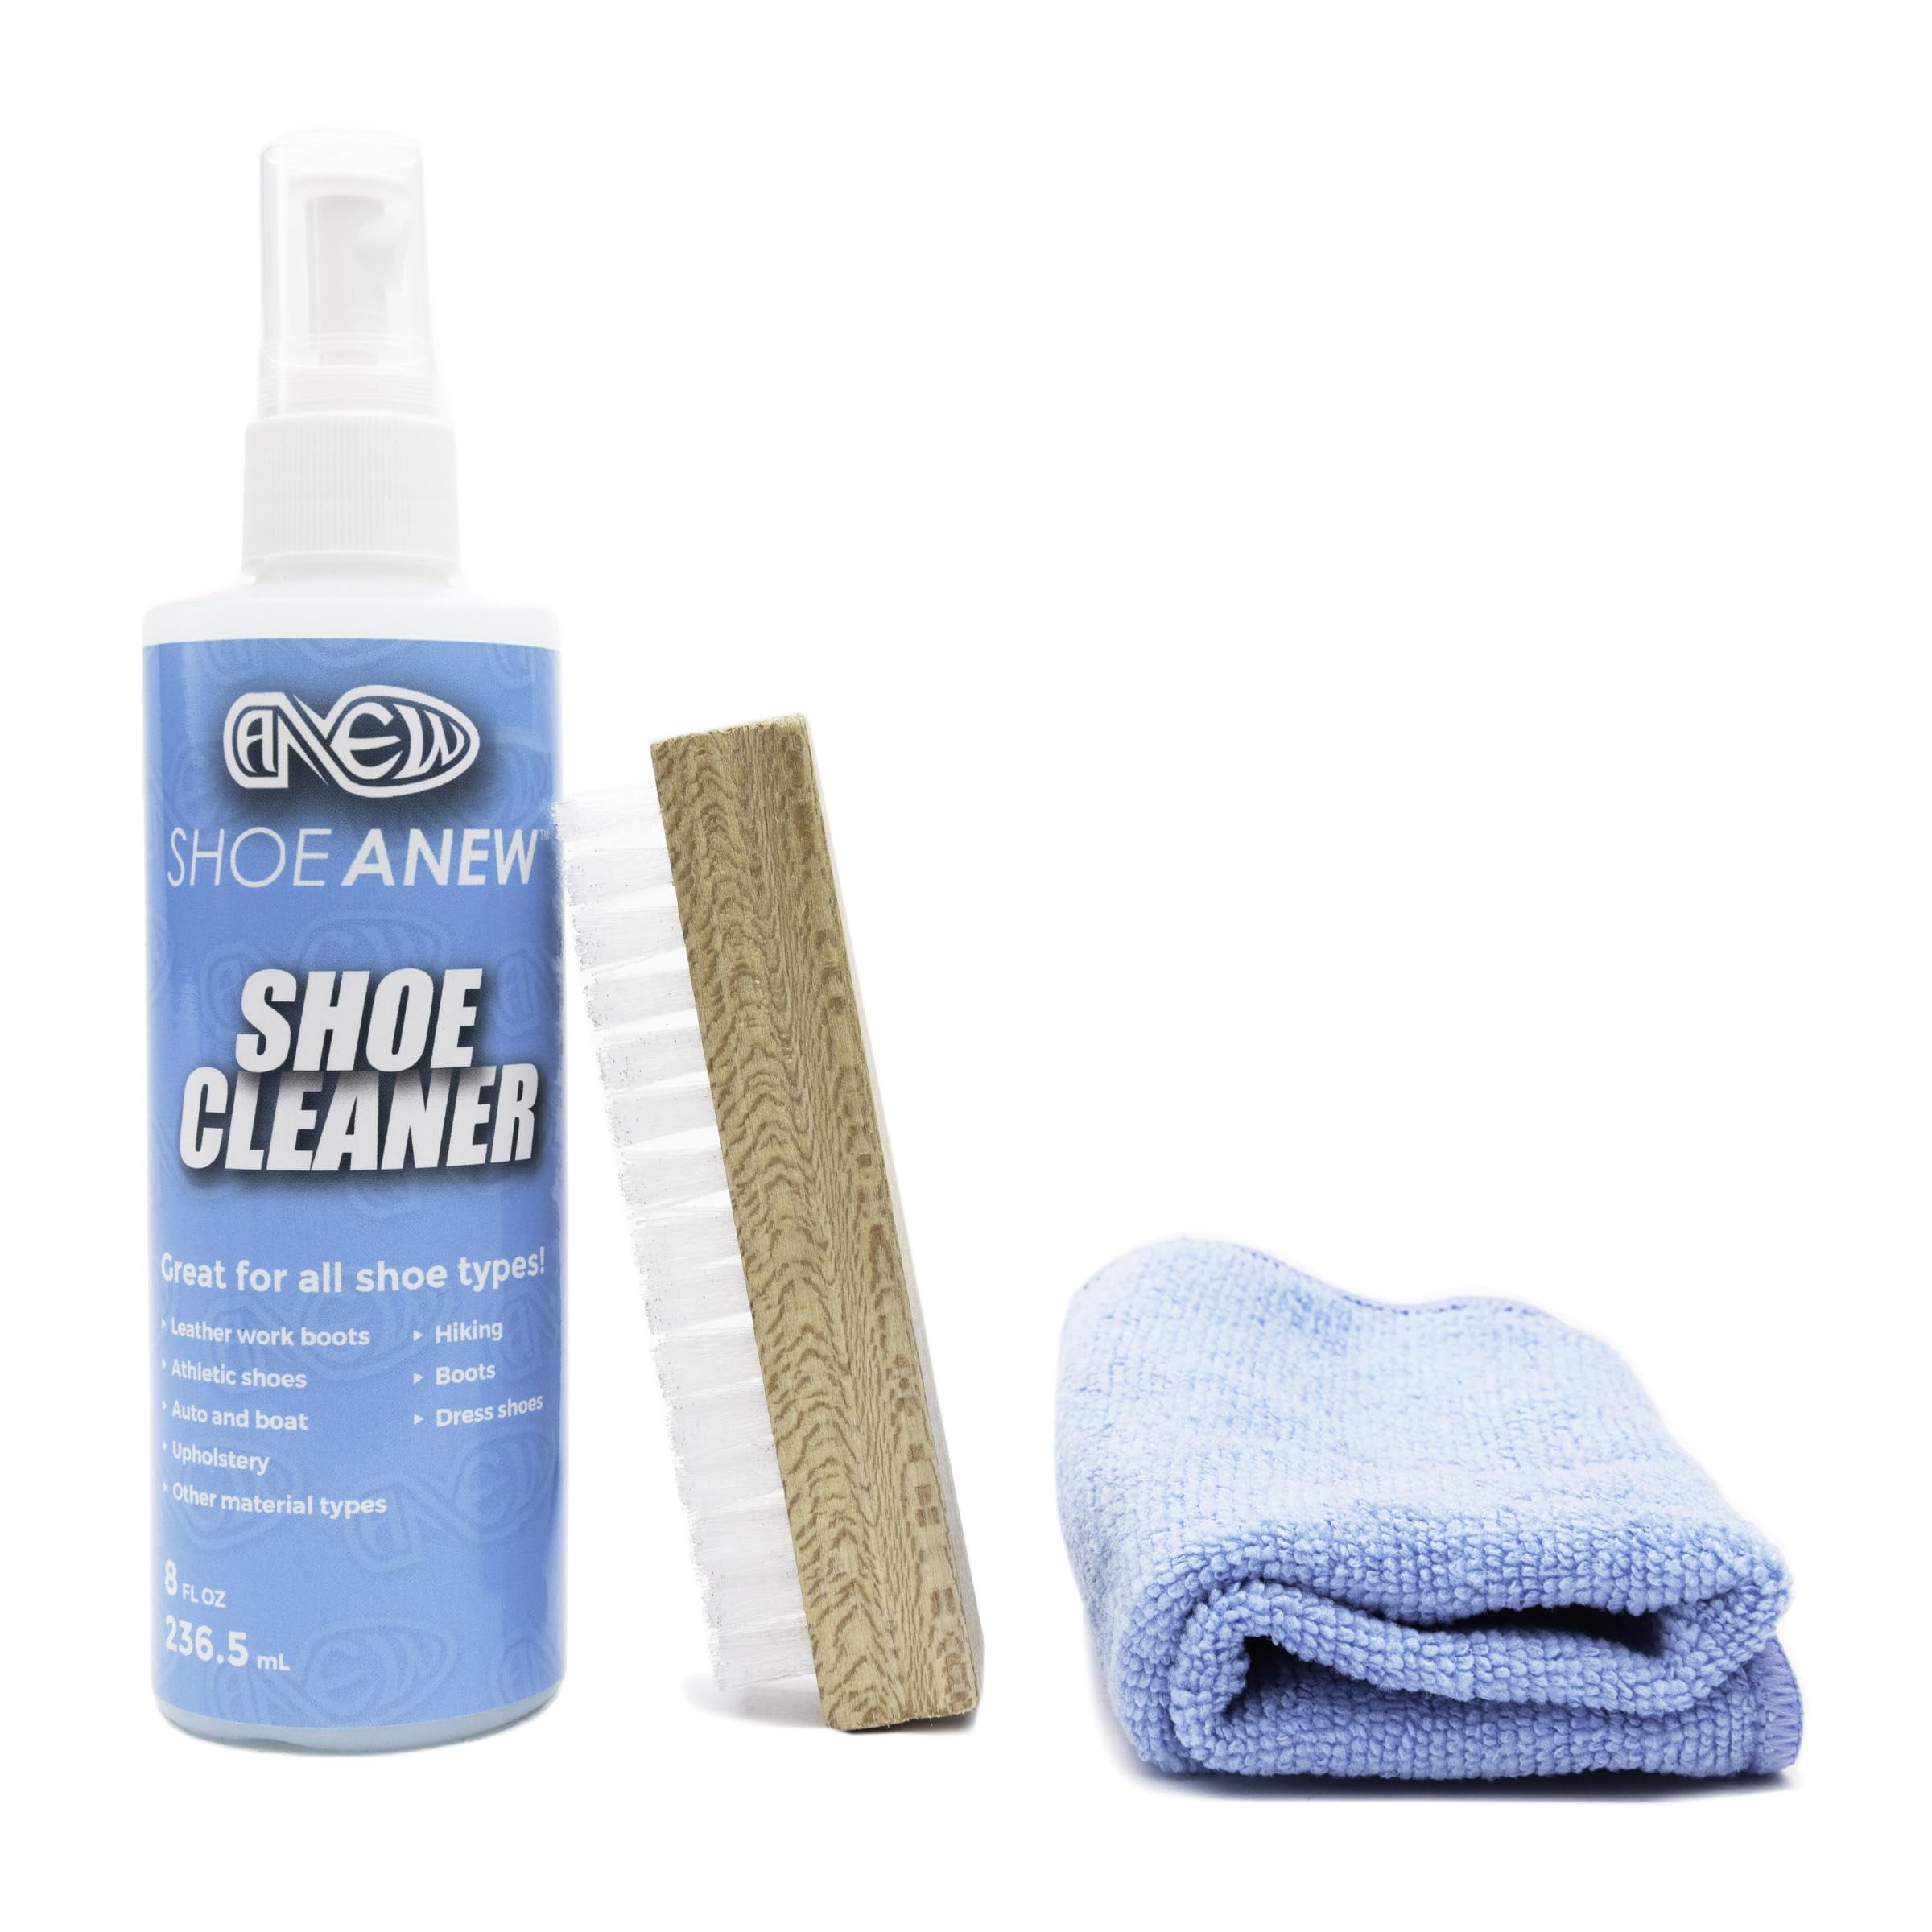 Pink Miracle - Shoe Cleaner (@thepinkmiracle) • Instagram photos and videos